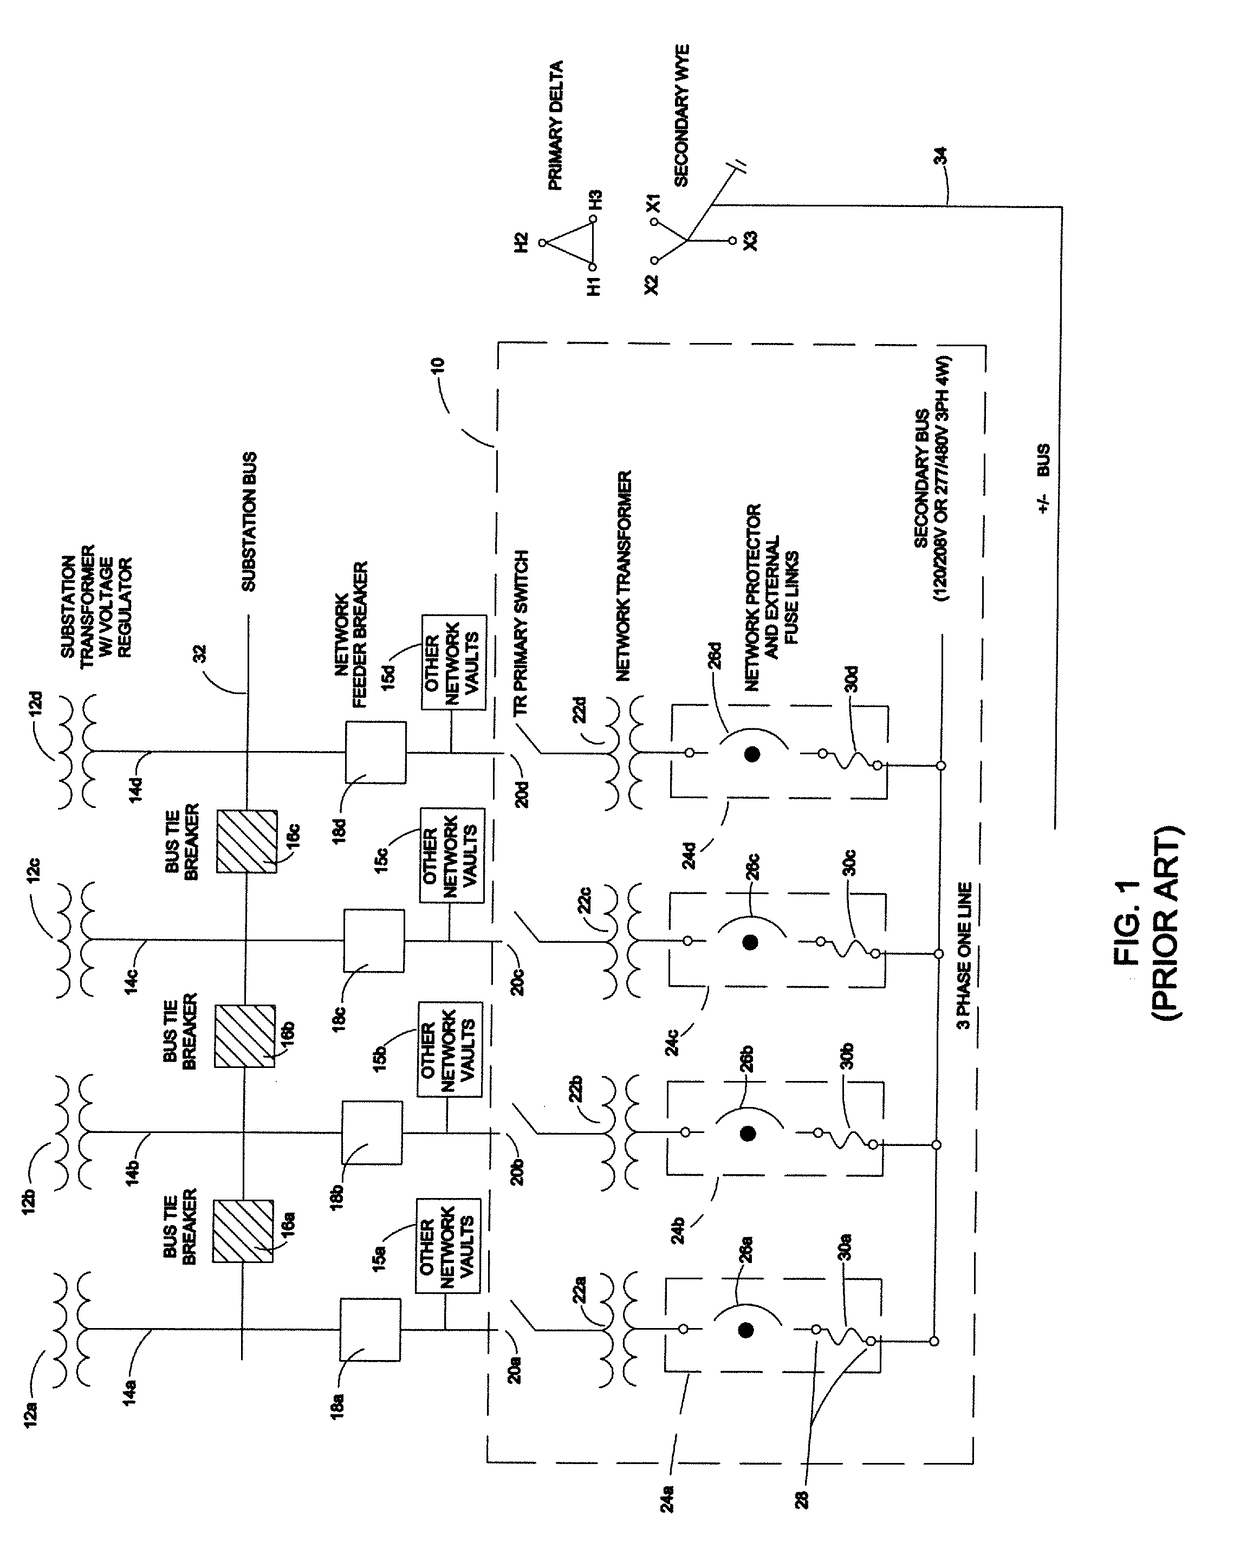 Apparatus for isolating a network protector in an electric power distribution network